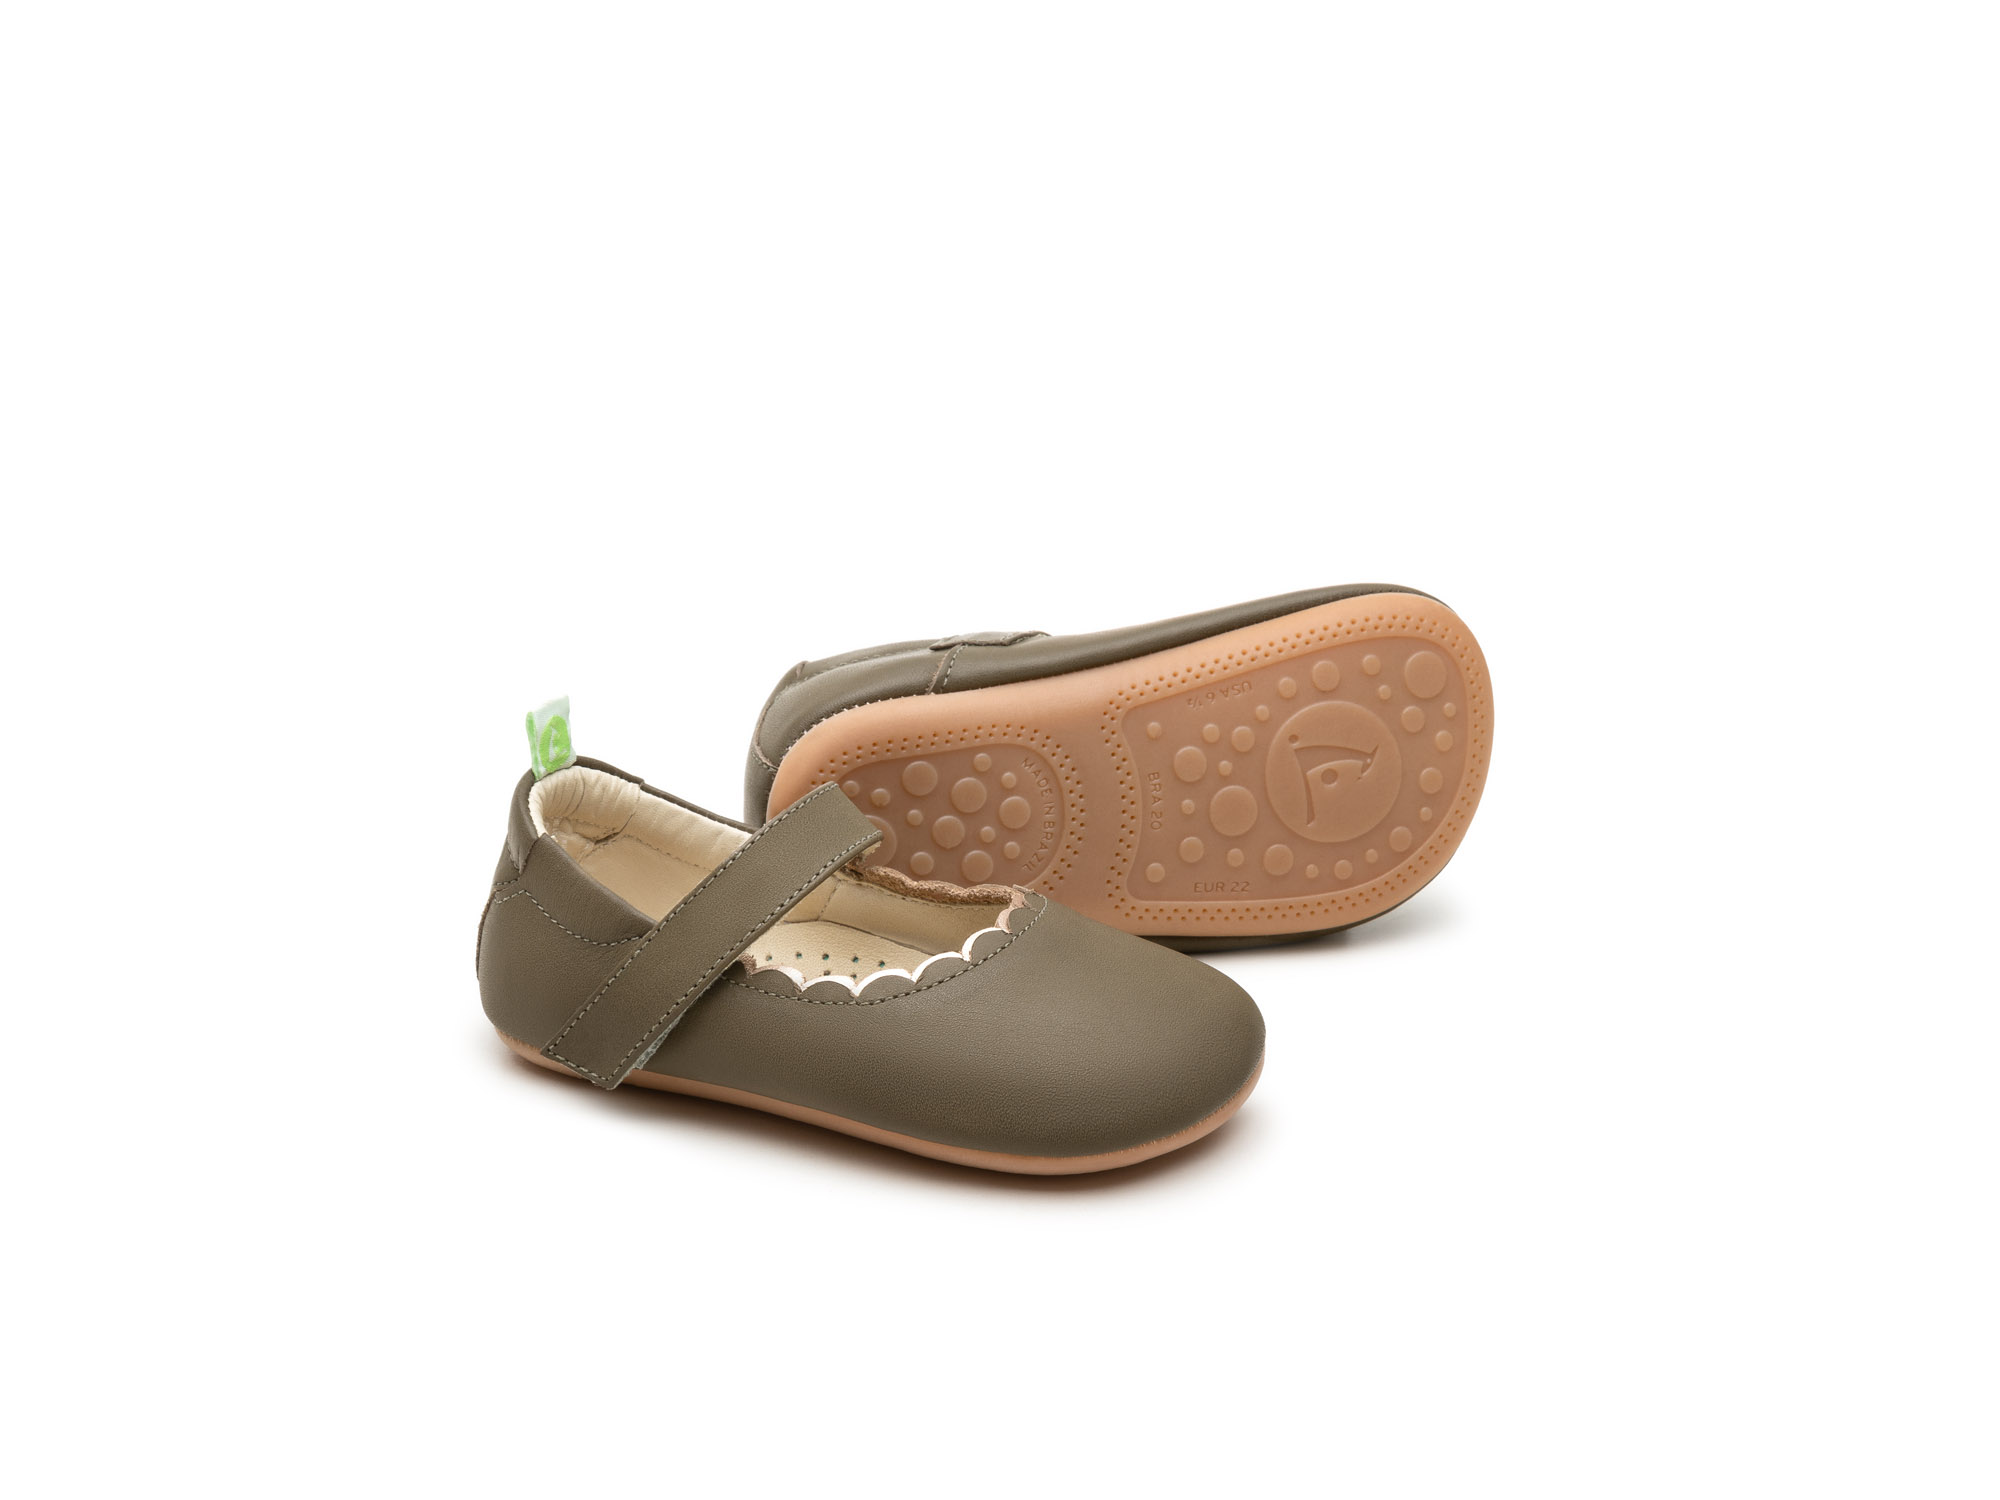 UP & GO Mary Janes for Girls Roundy | Tip Toey Joey - Australia - 0